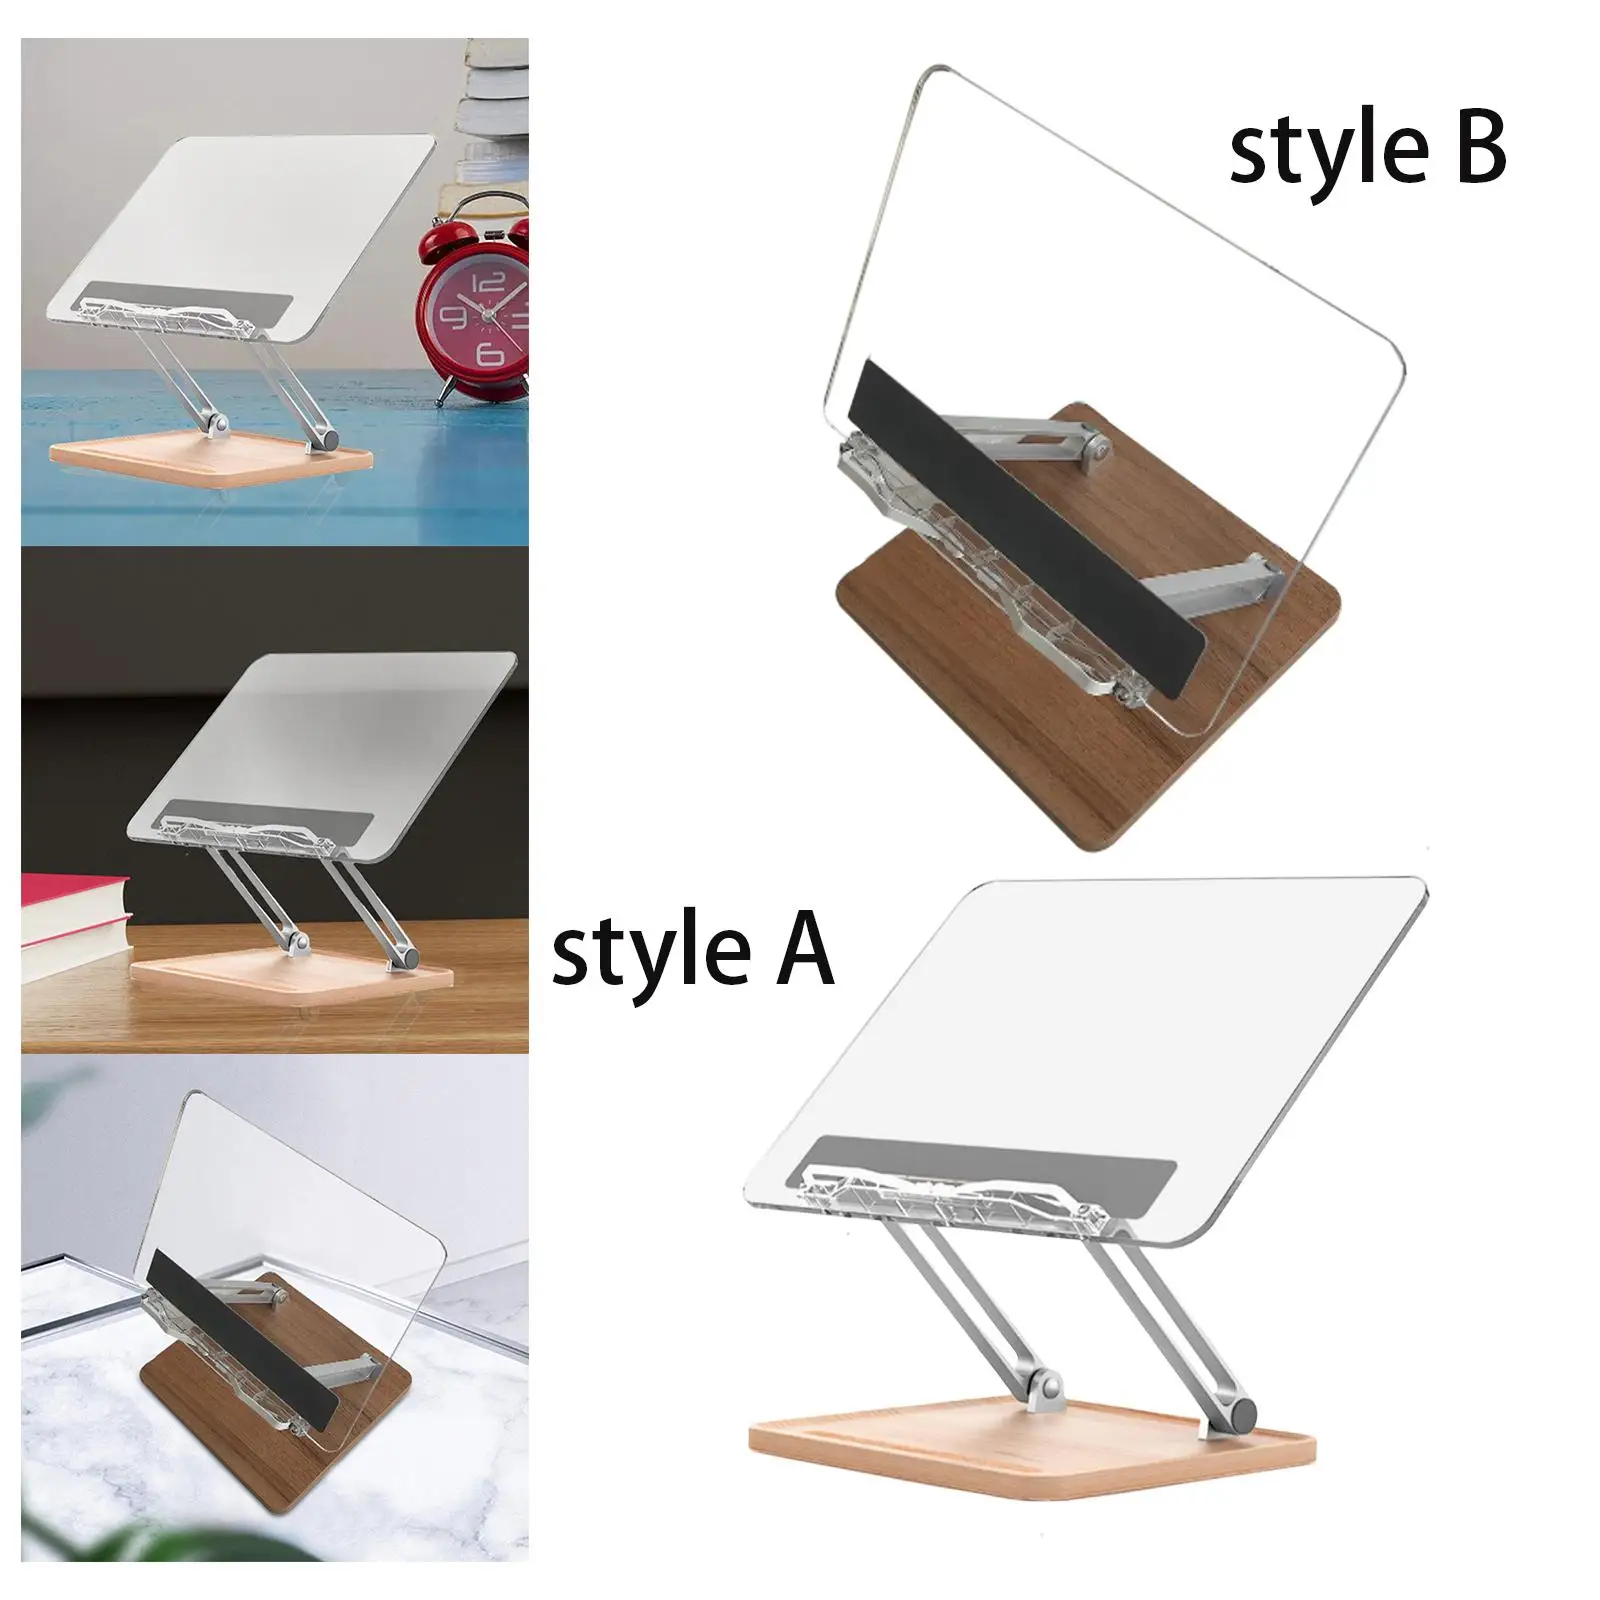 Tablet Holder Foldable Sturdy Multifunctional Transparent Book Stand Reading Stand for Living Room Desktop Office Kitchen Recipe